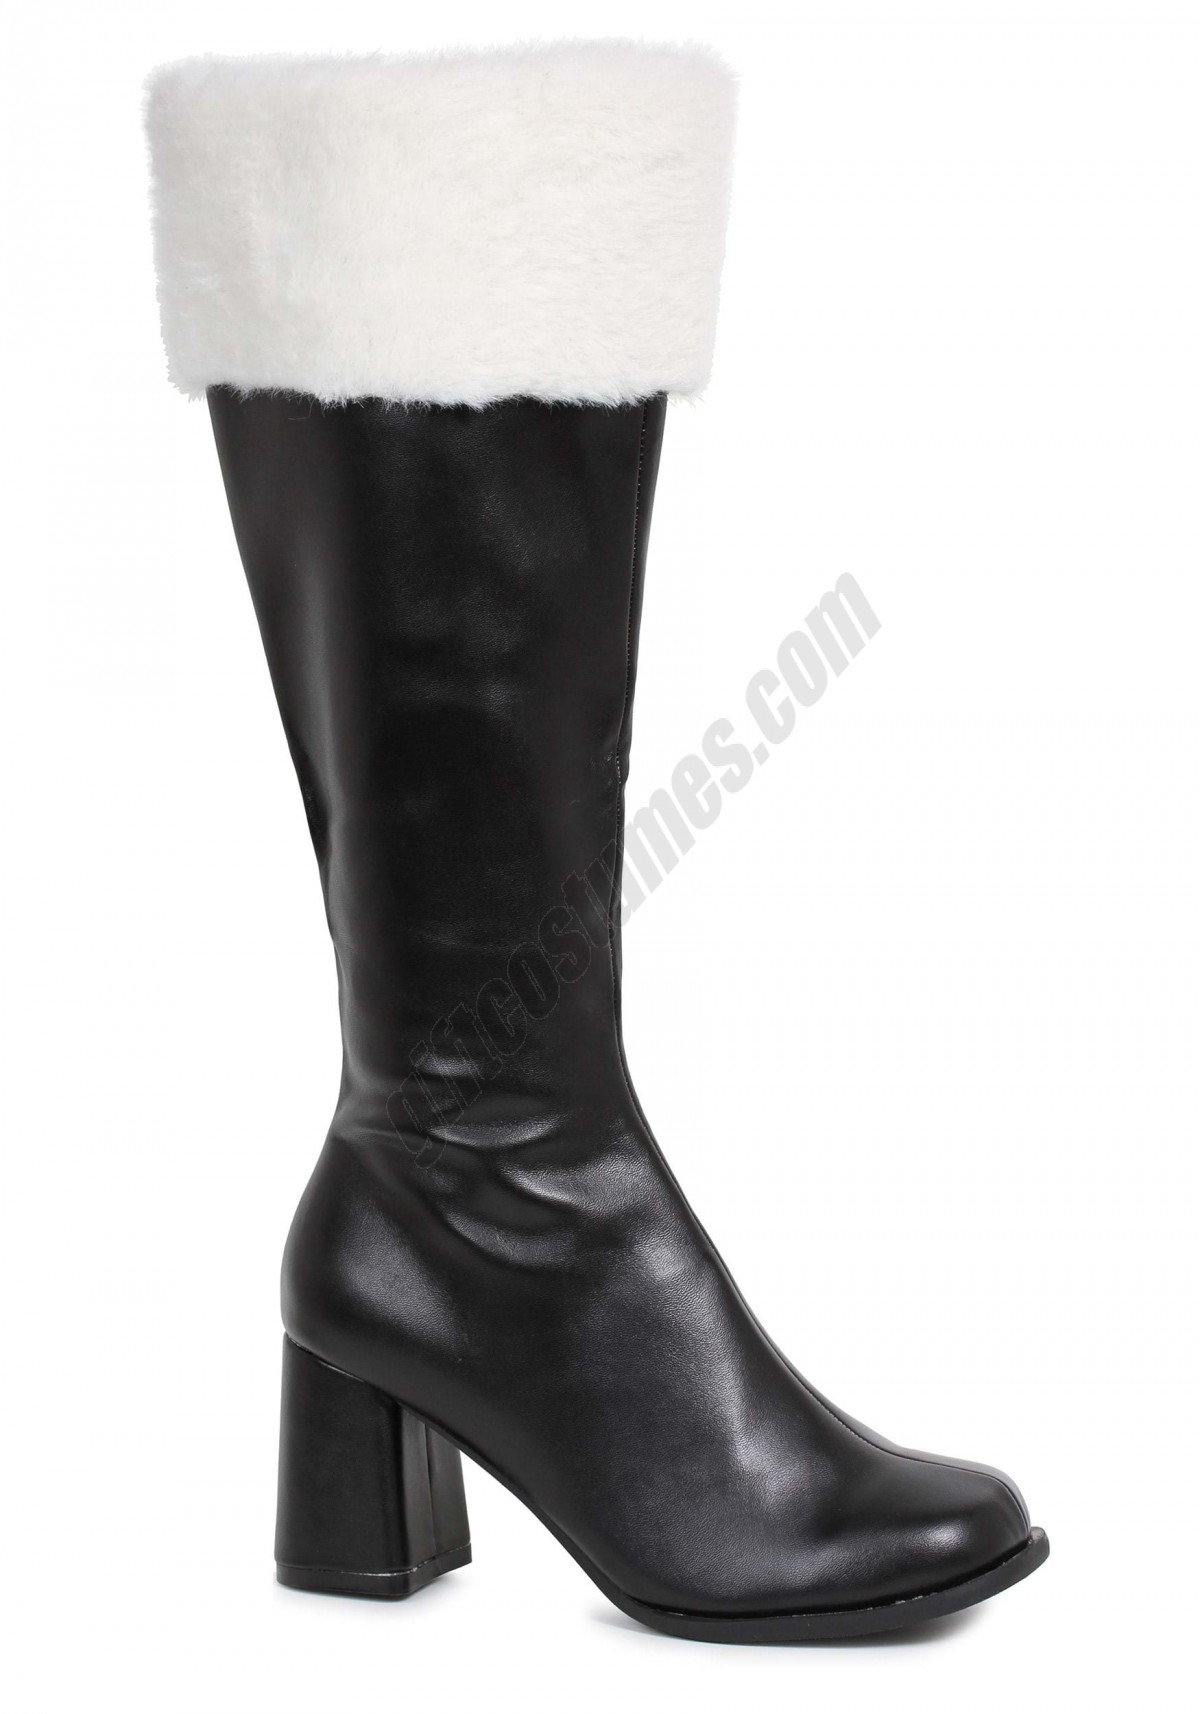 Gogo Fur Topped Boots for Women Promotions - -0